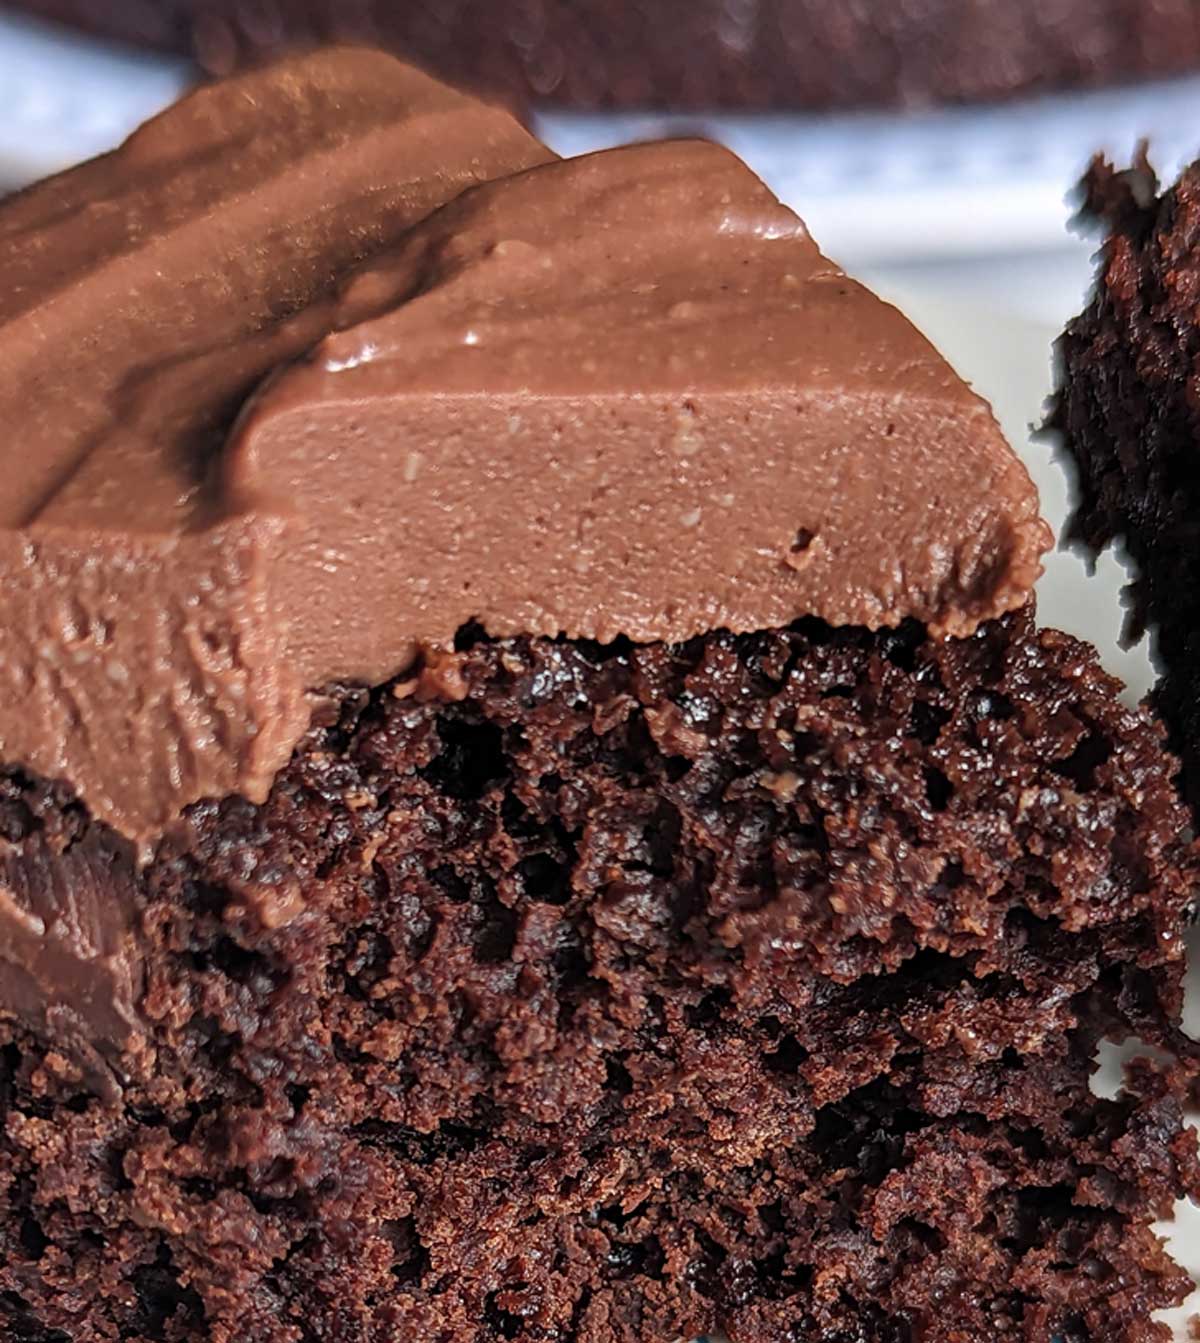 Low-Fat, High Protein, Chocolate Cake - The Diet Chef